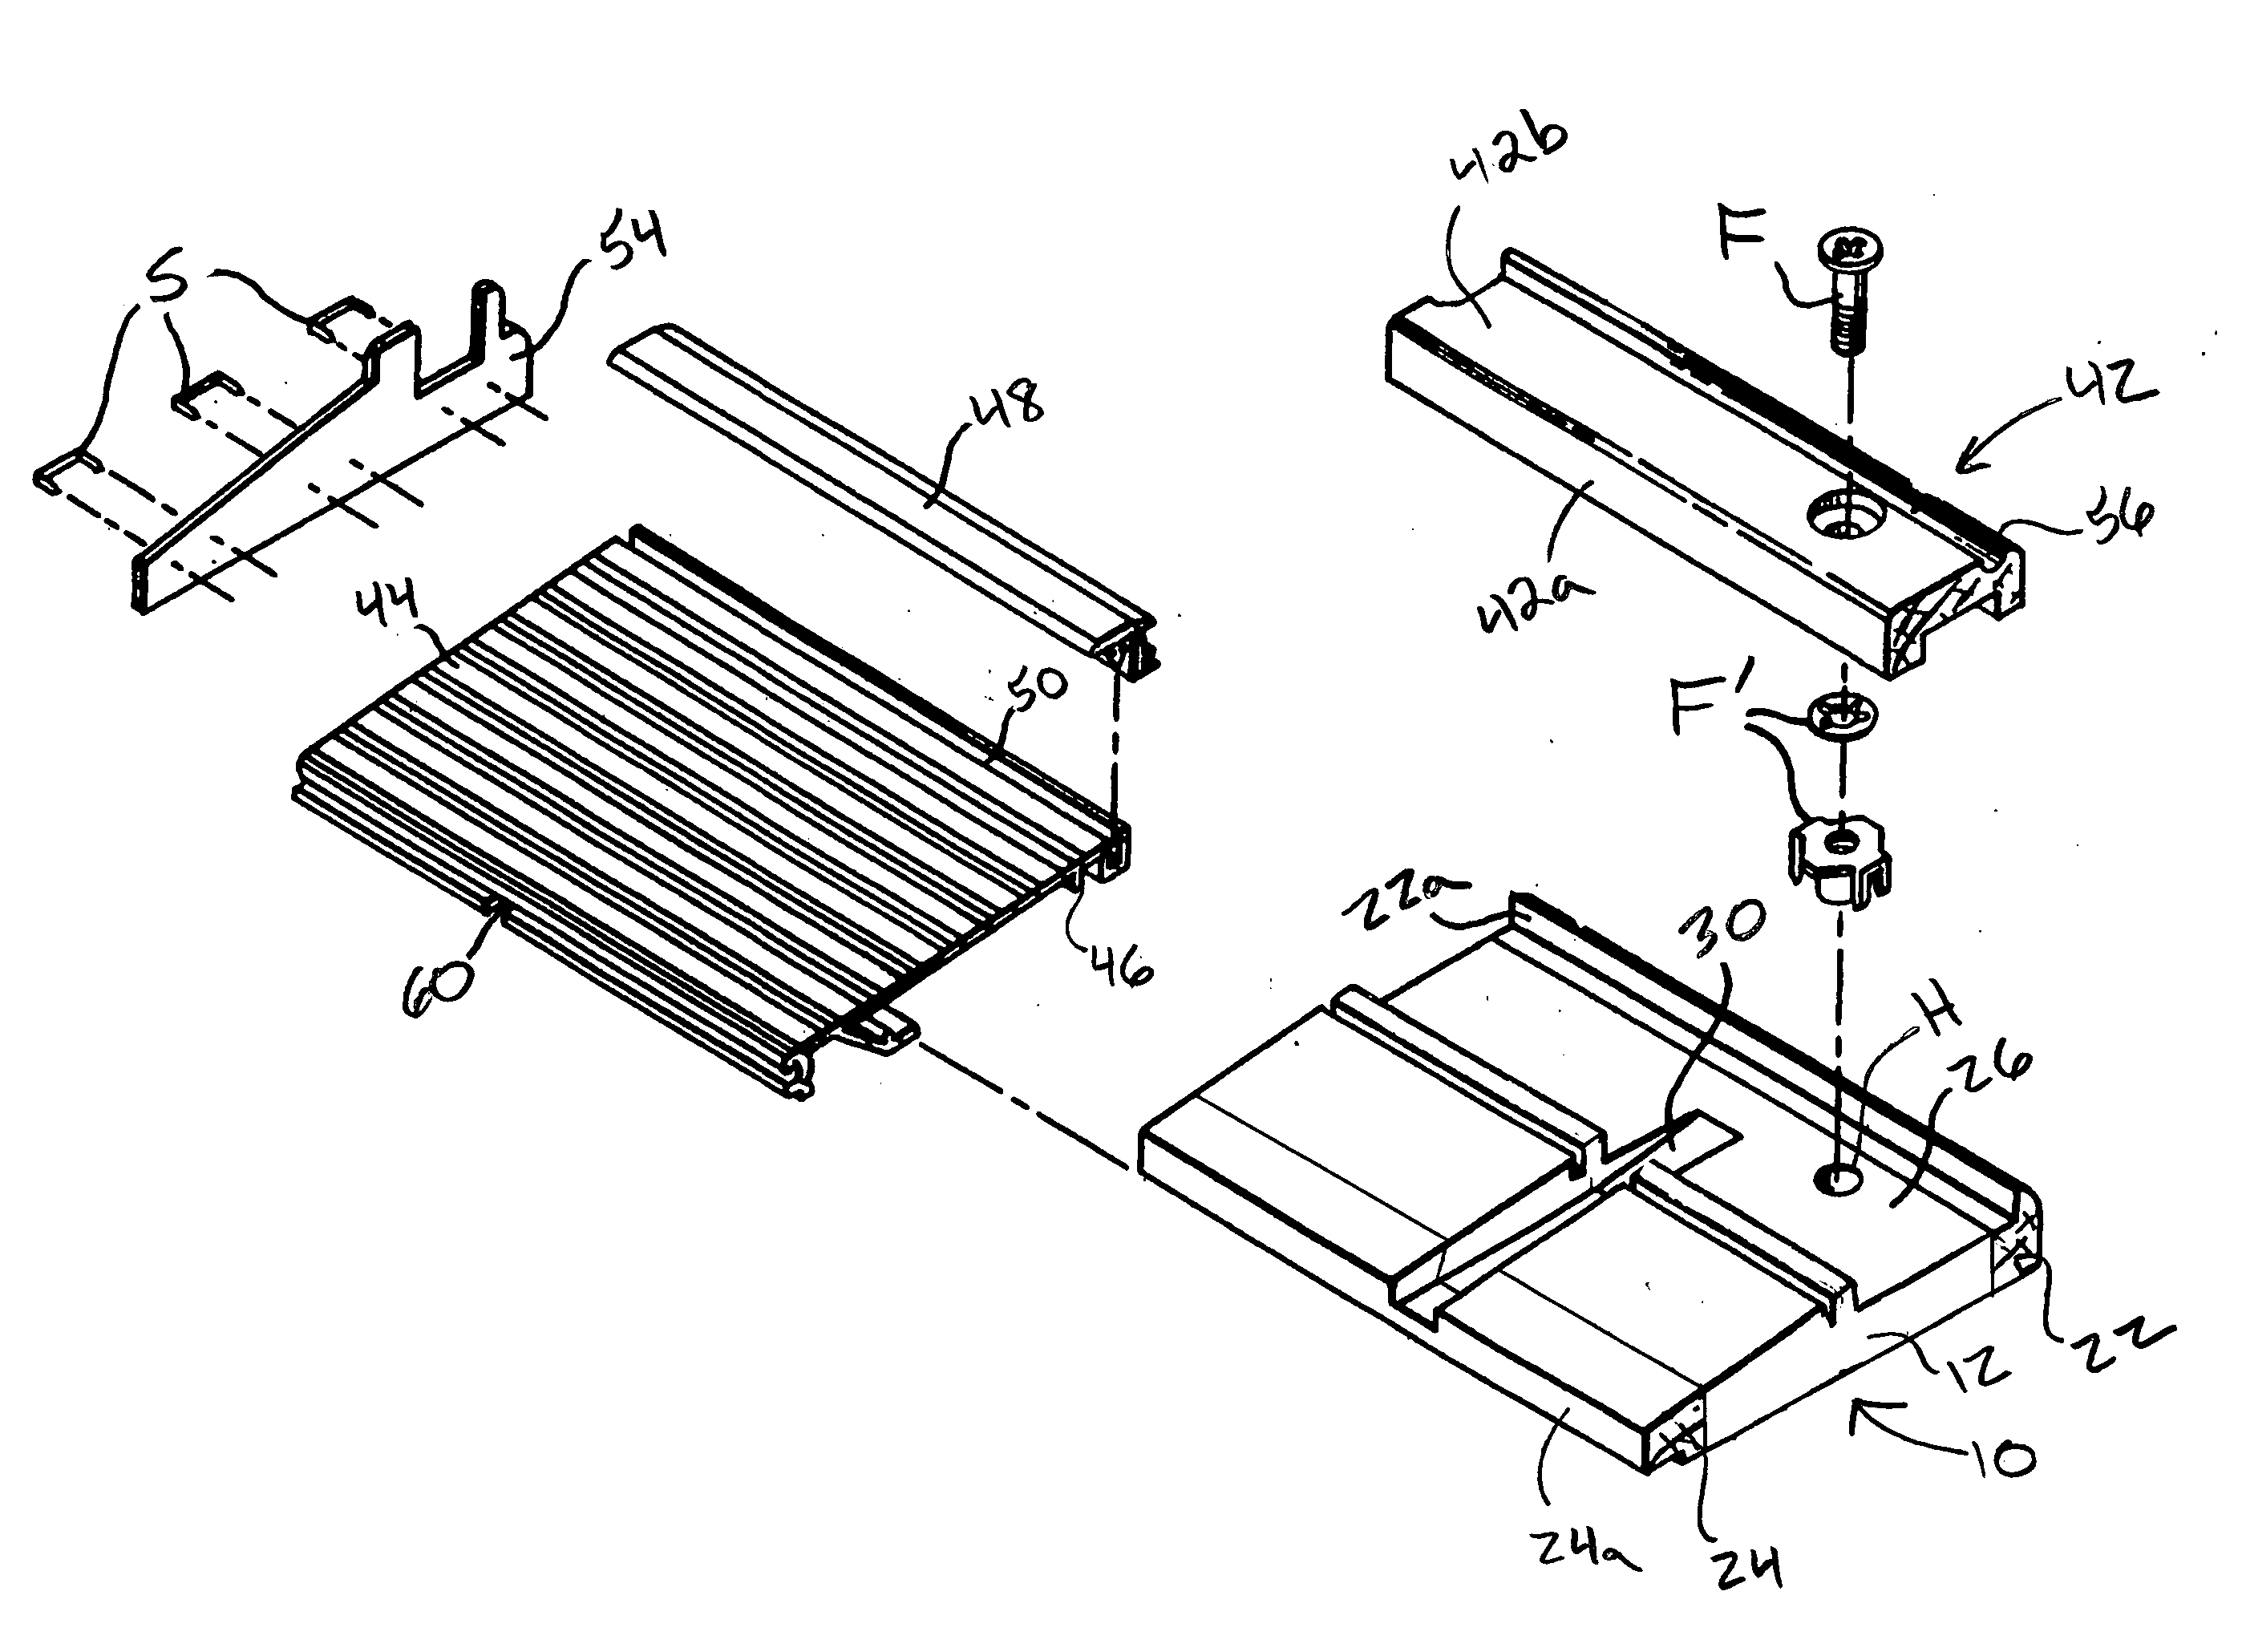 Banded door sill base and door sill assembly, and method of forming same